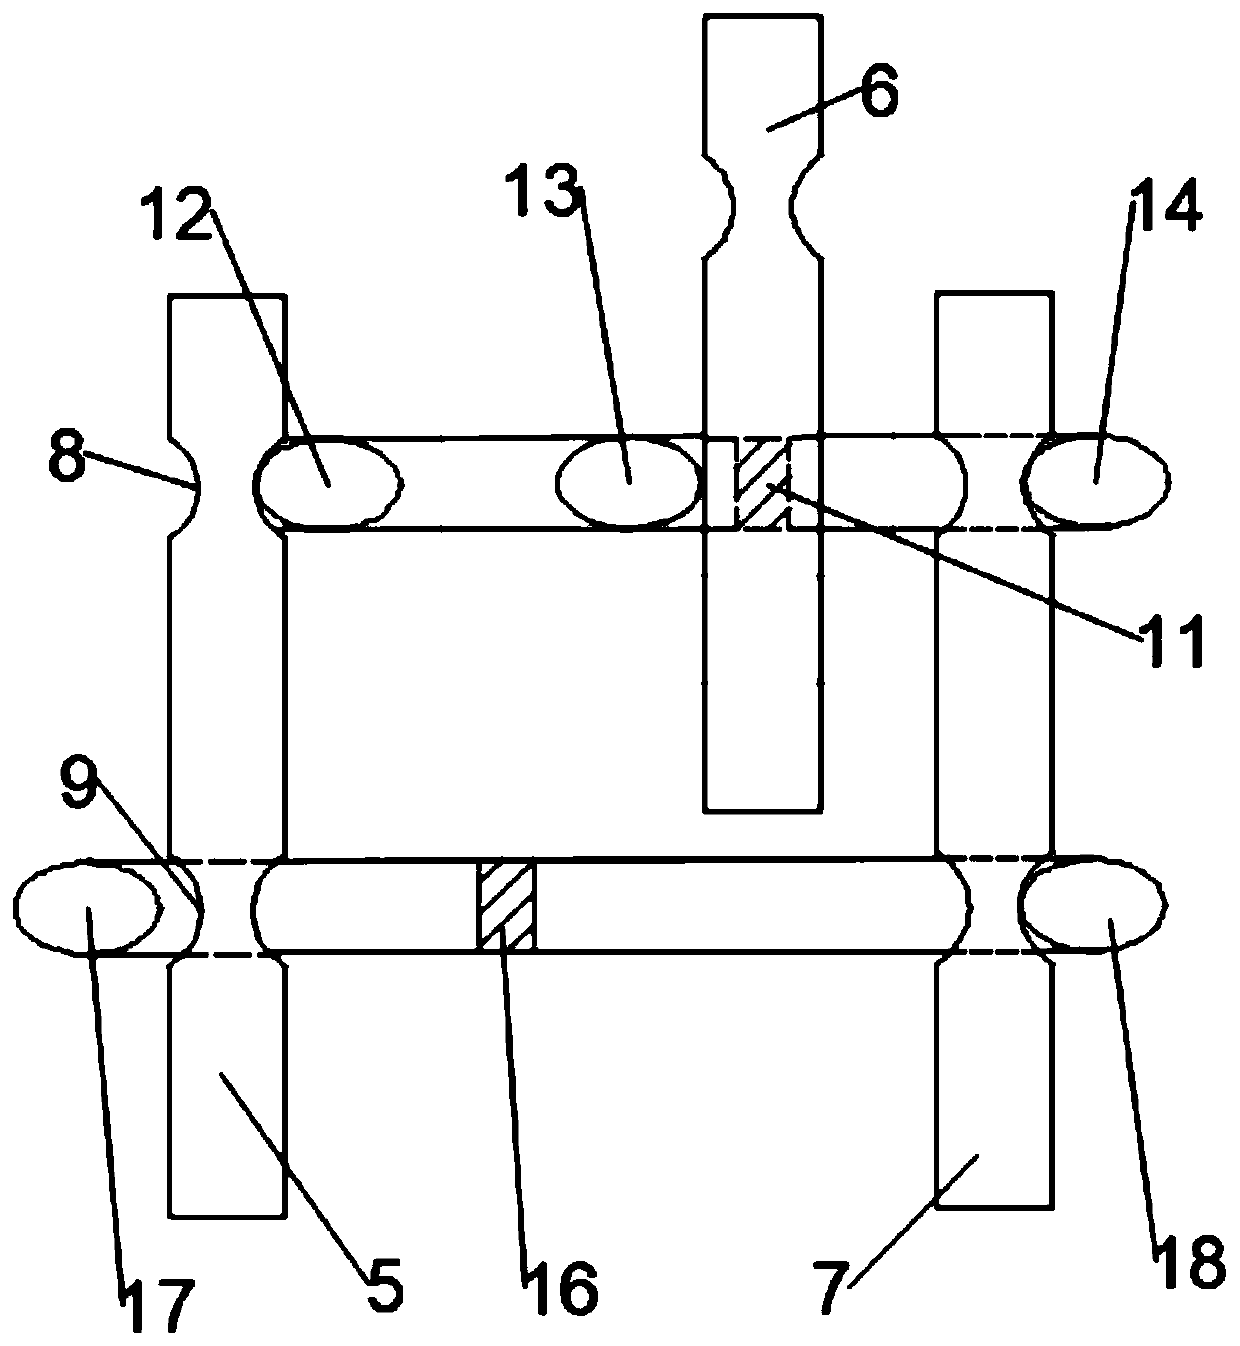 A gear interlocking device for automobile transmission